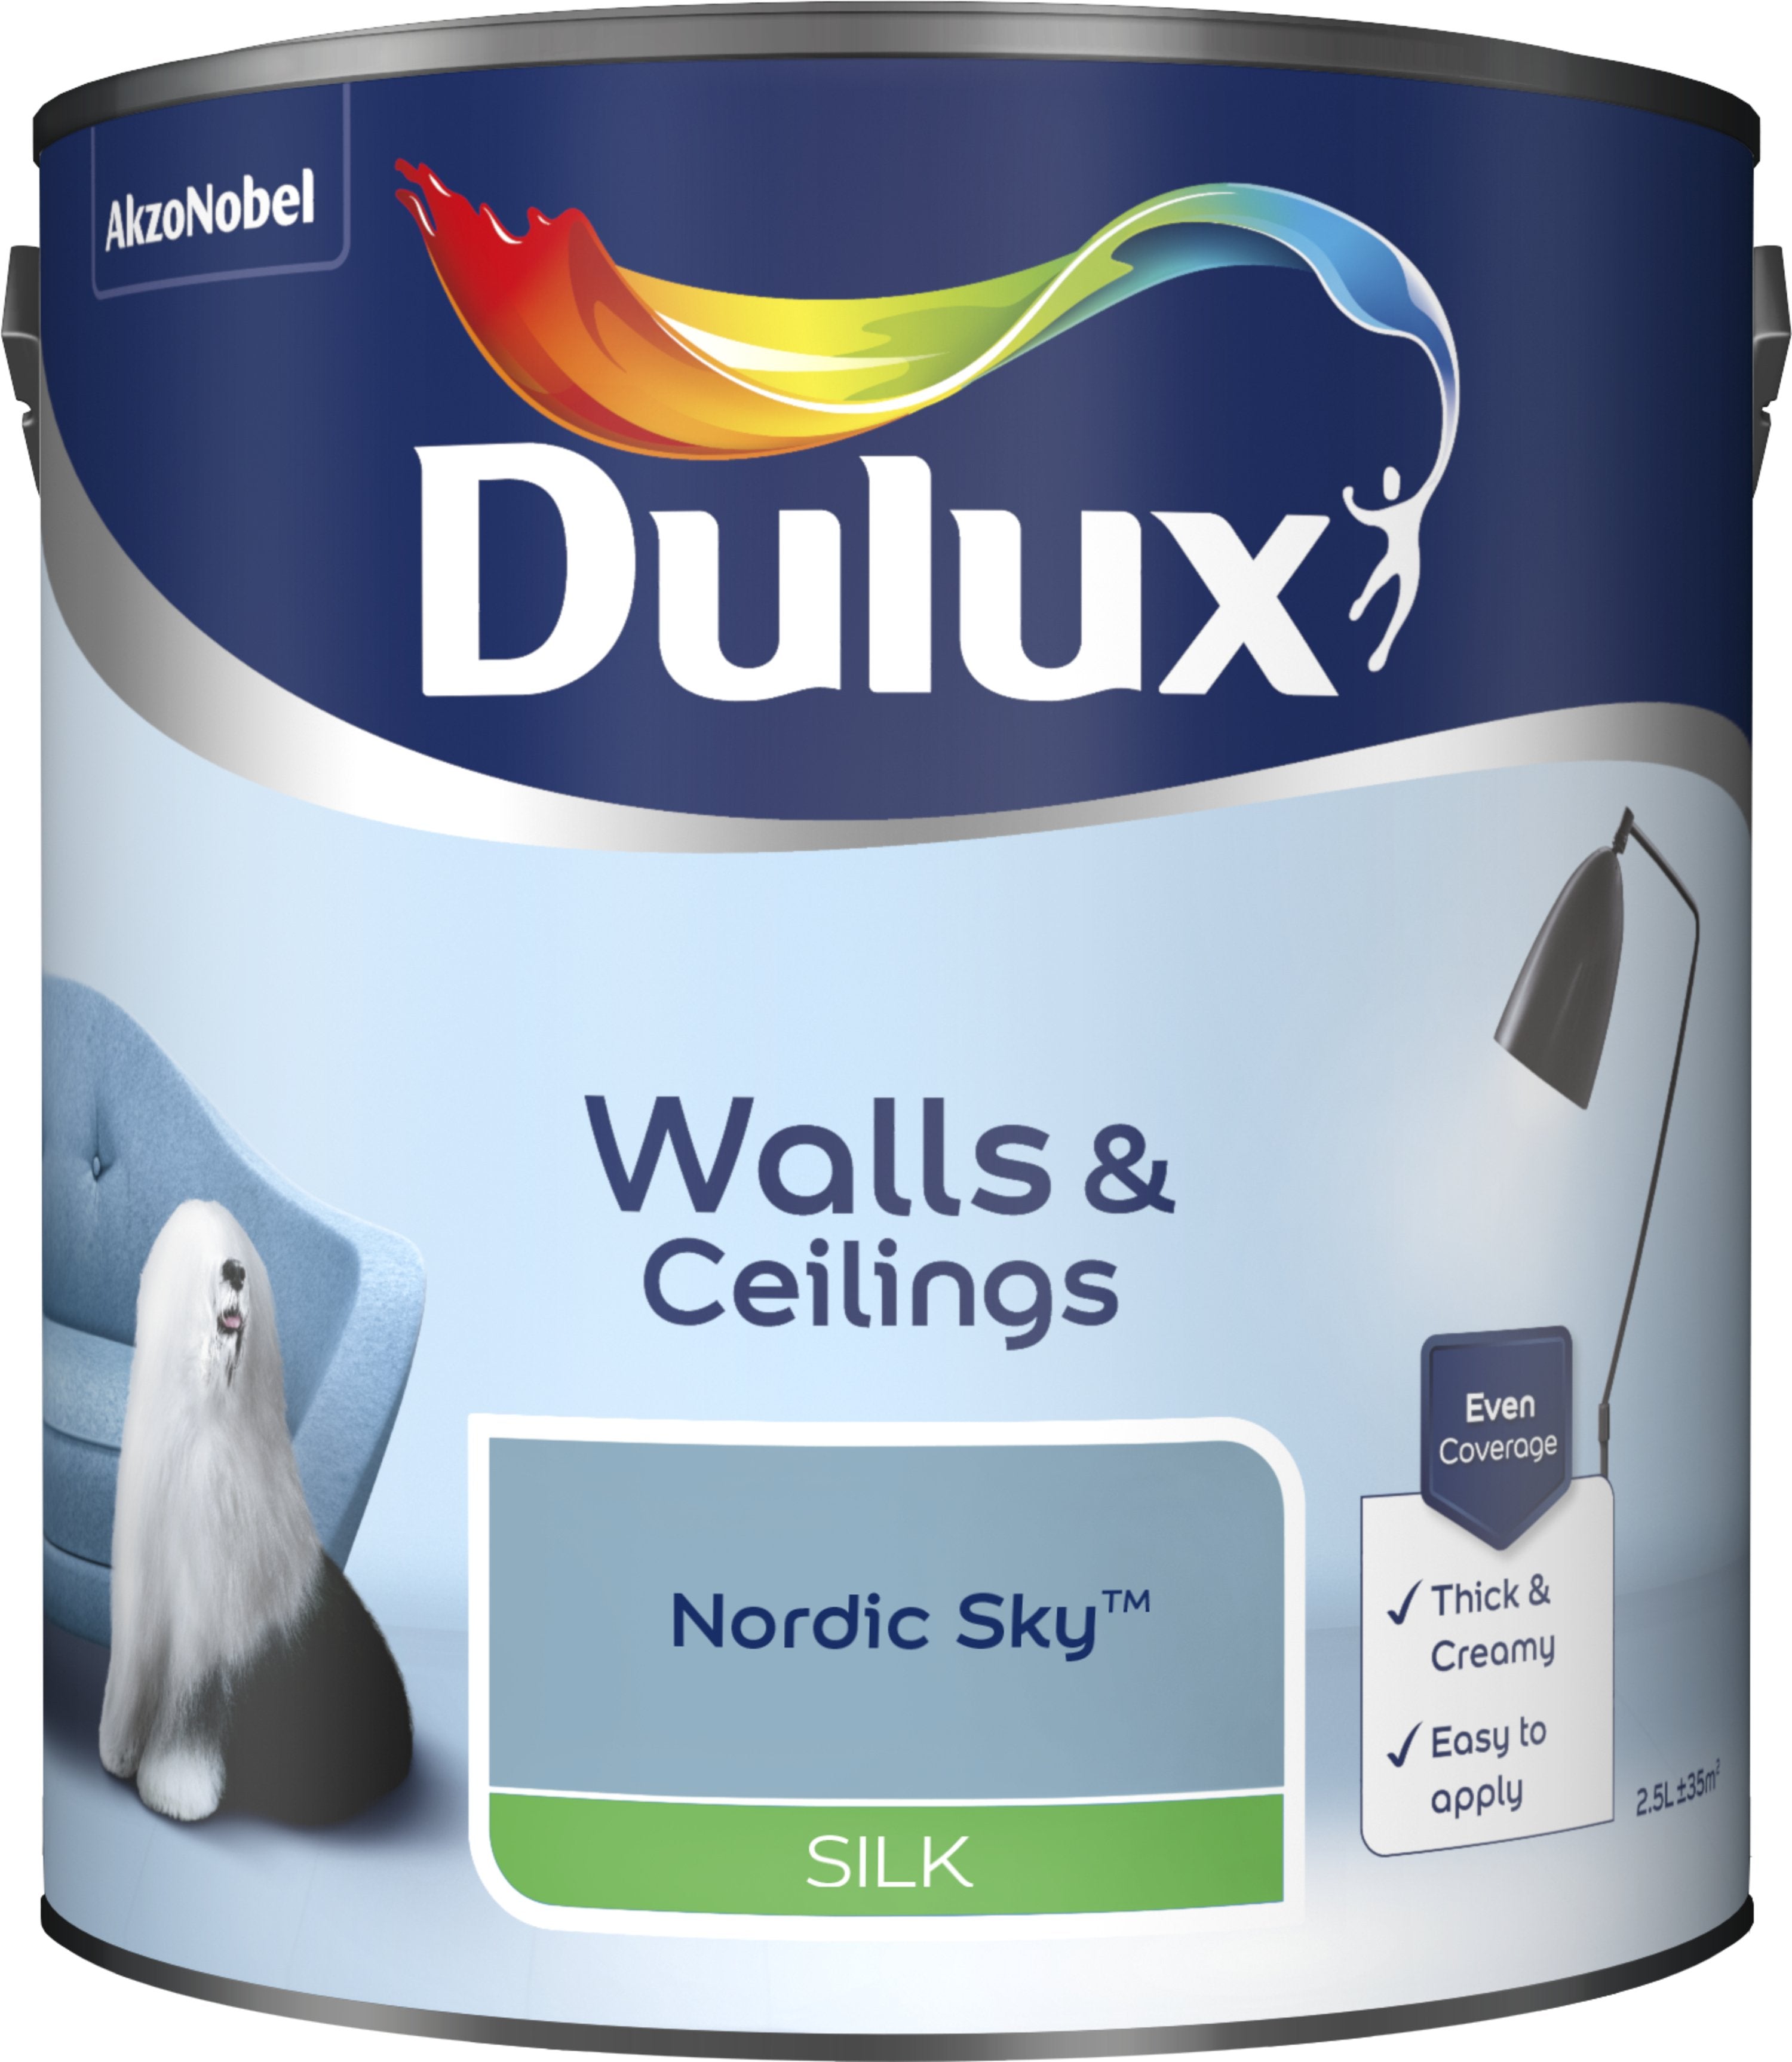 Dulux Silk Emulsion Paint For Walls And Ceilings - Nordic Sky 2.5L Garden & Diy  Home Improvements  